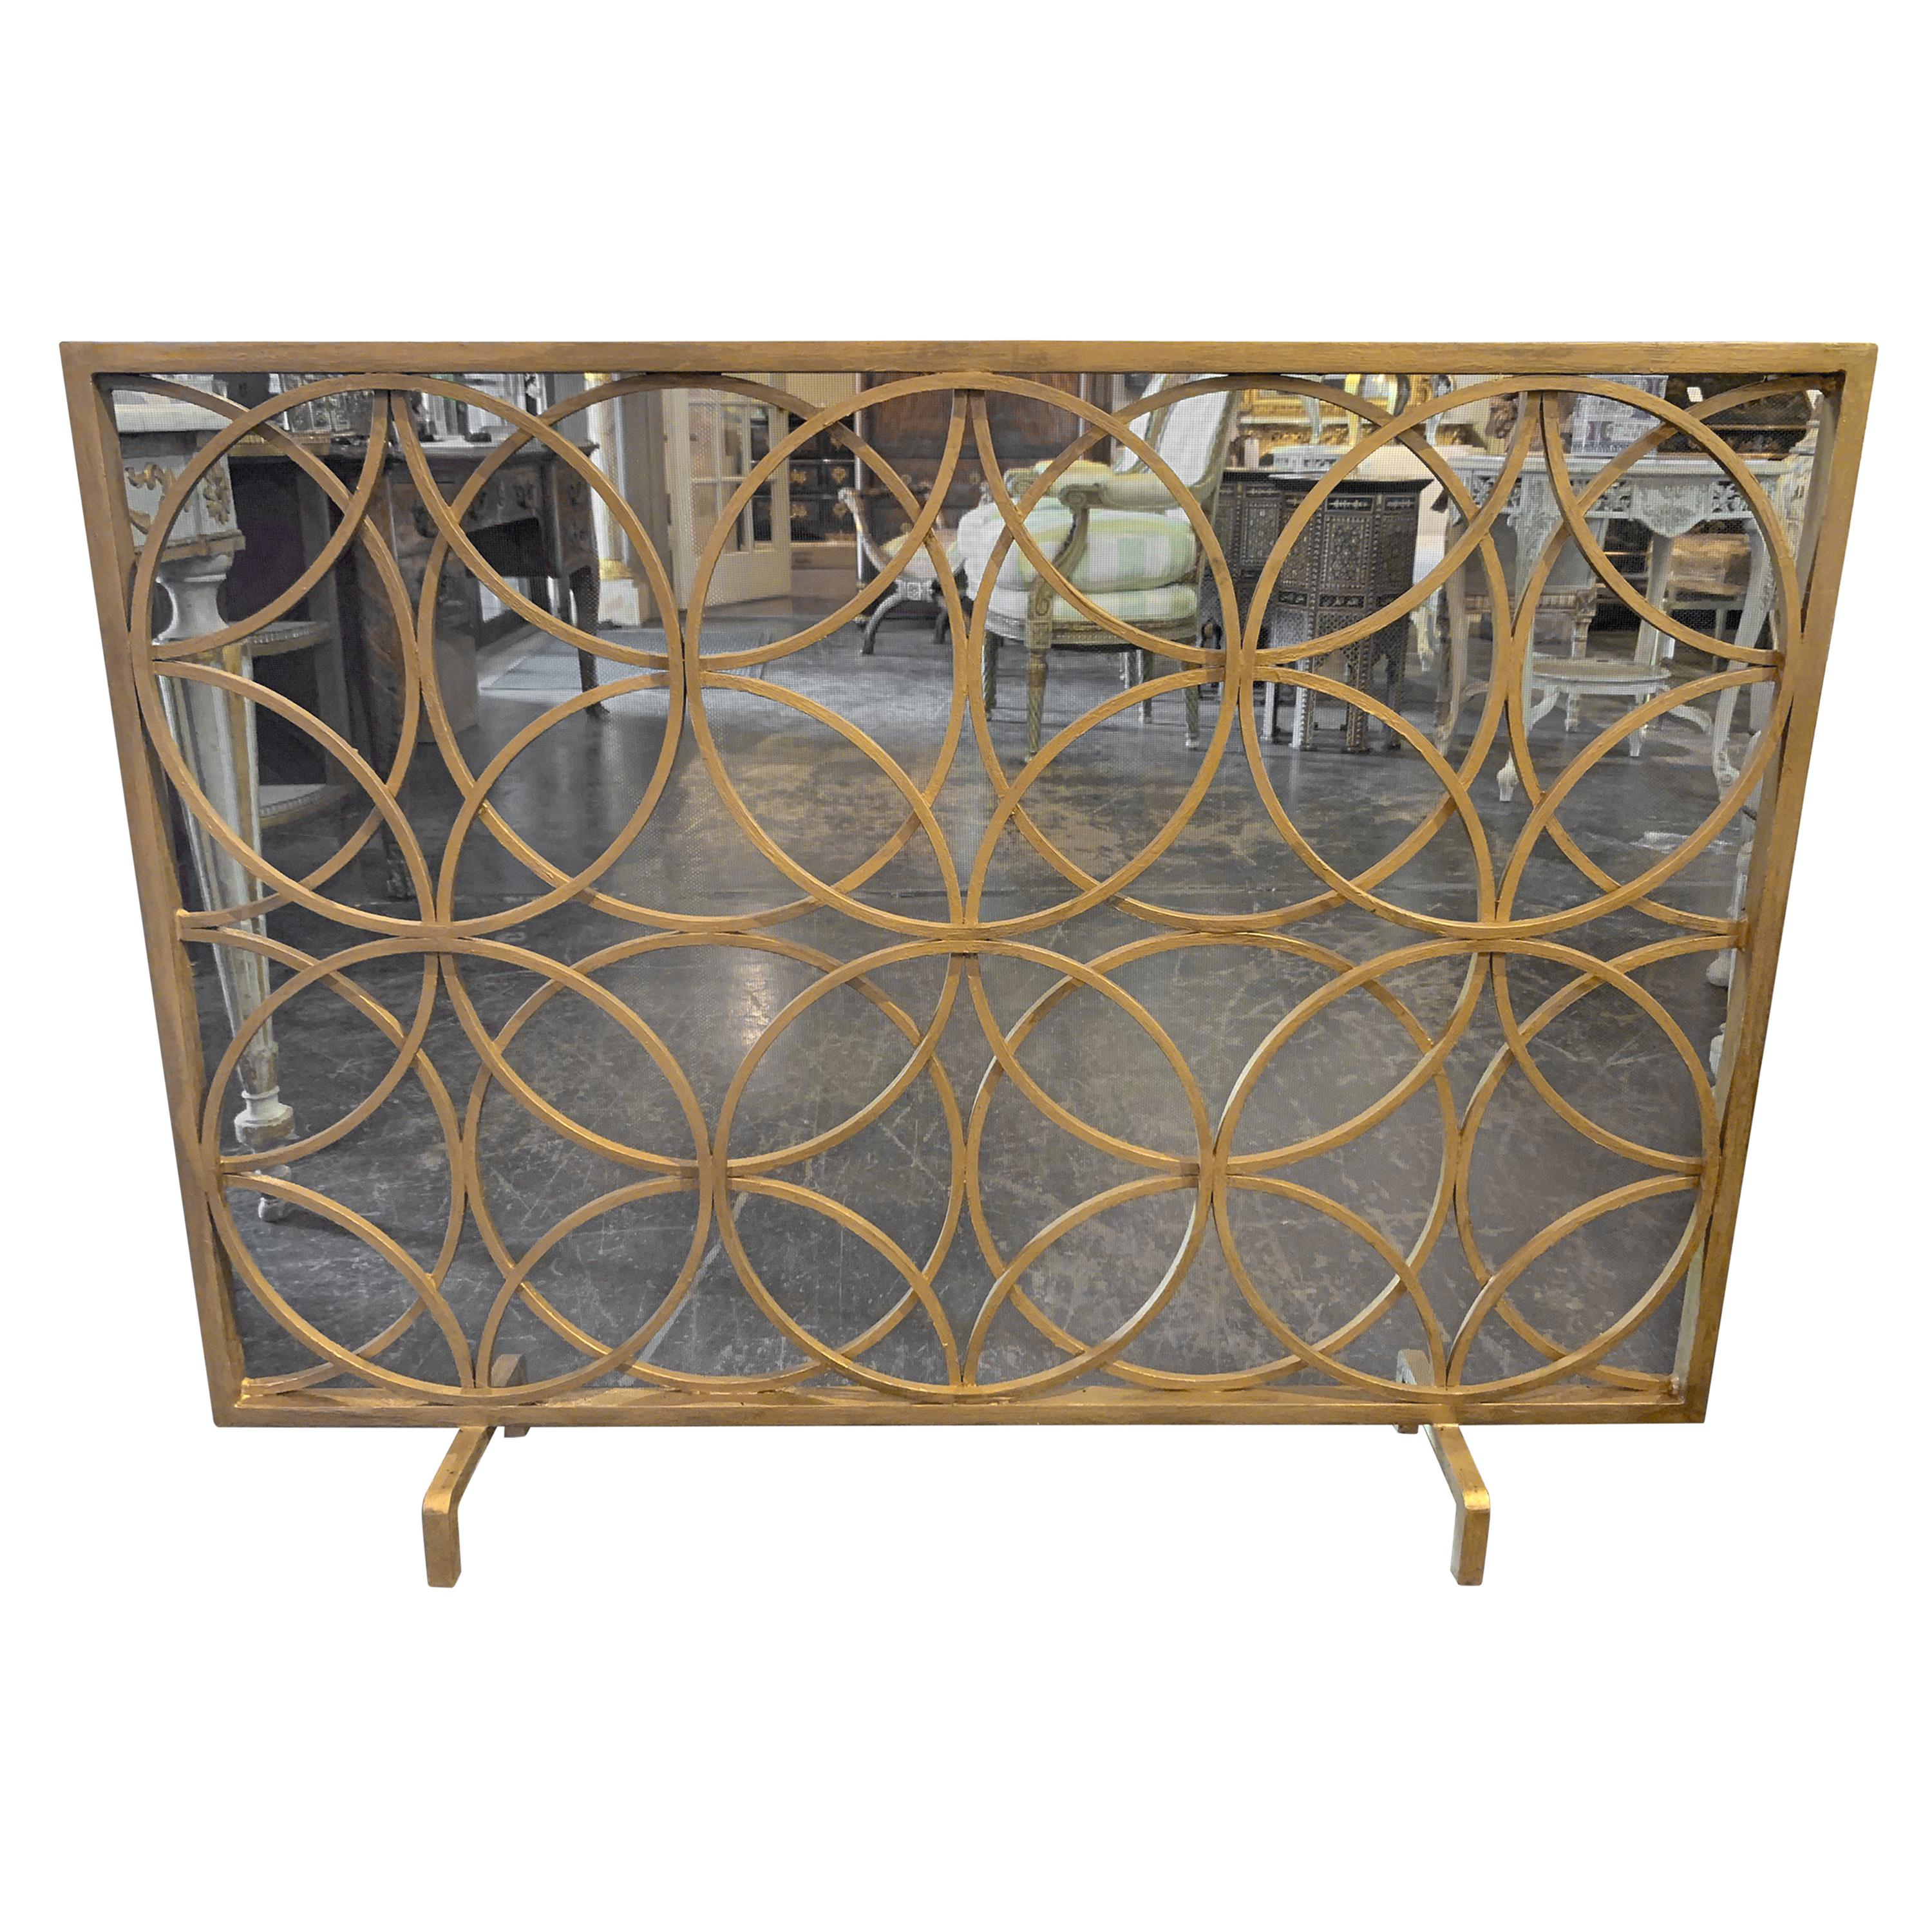 Modern Fire Place Screen in a Gilt Finish